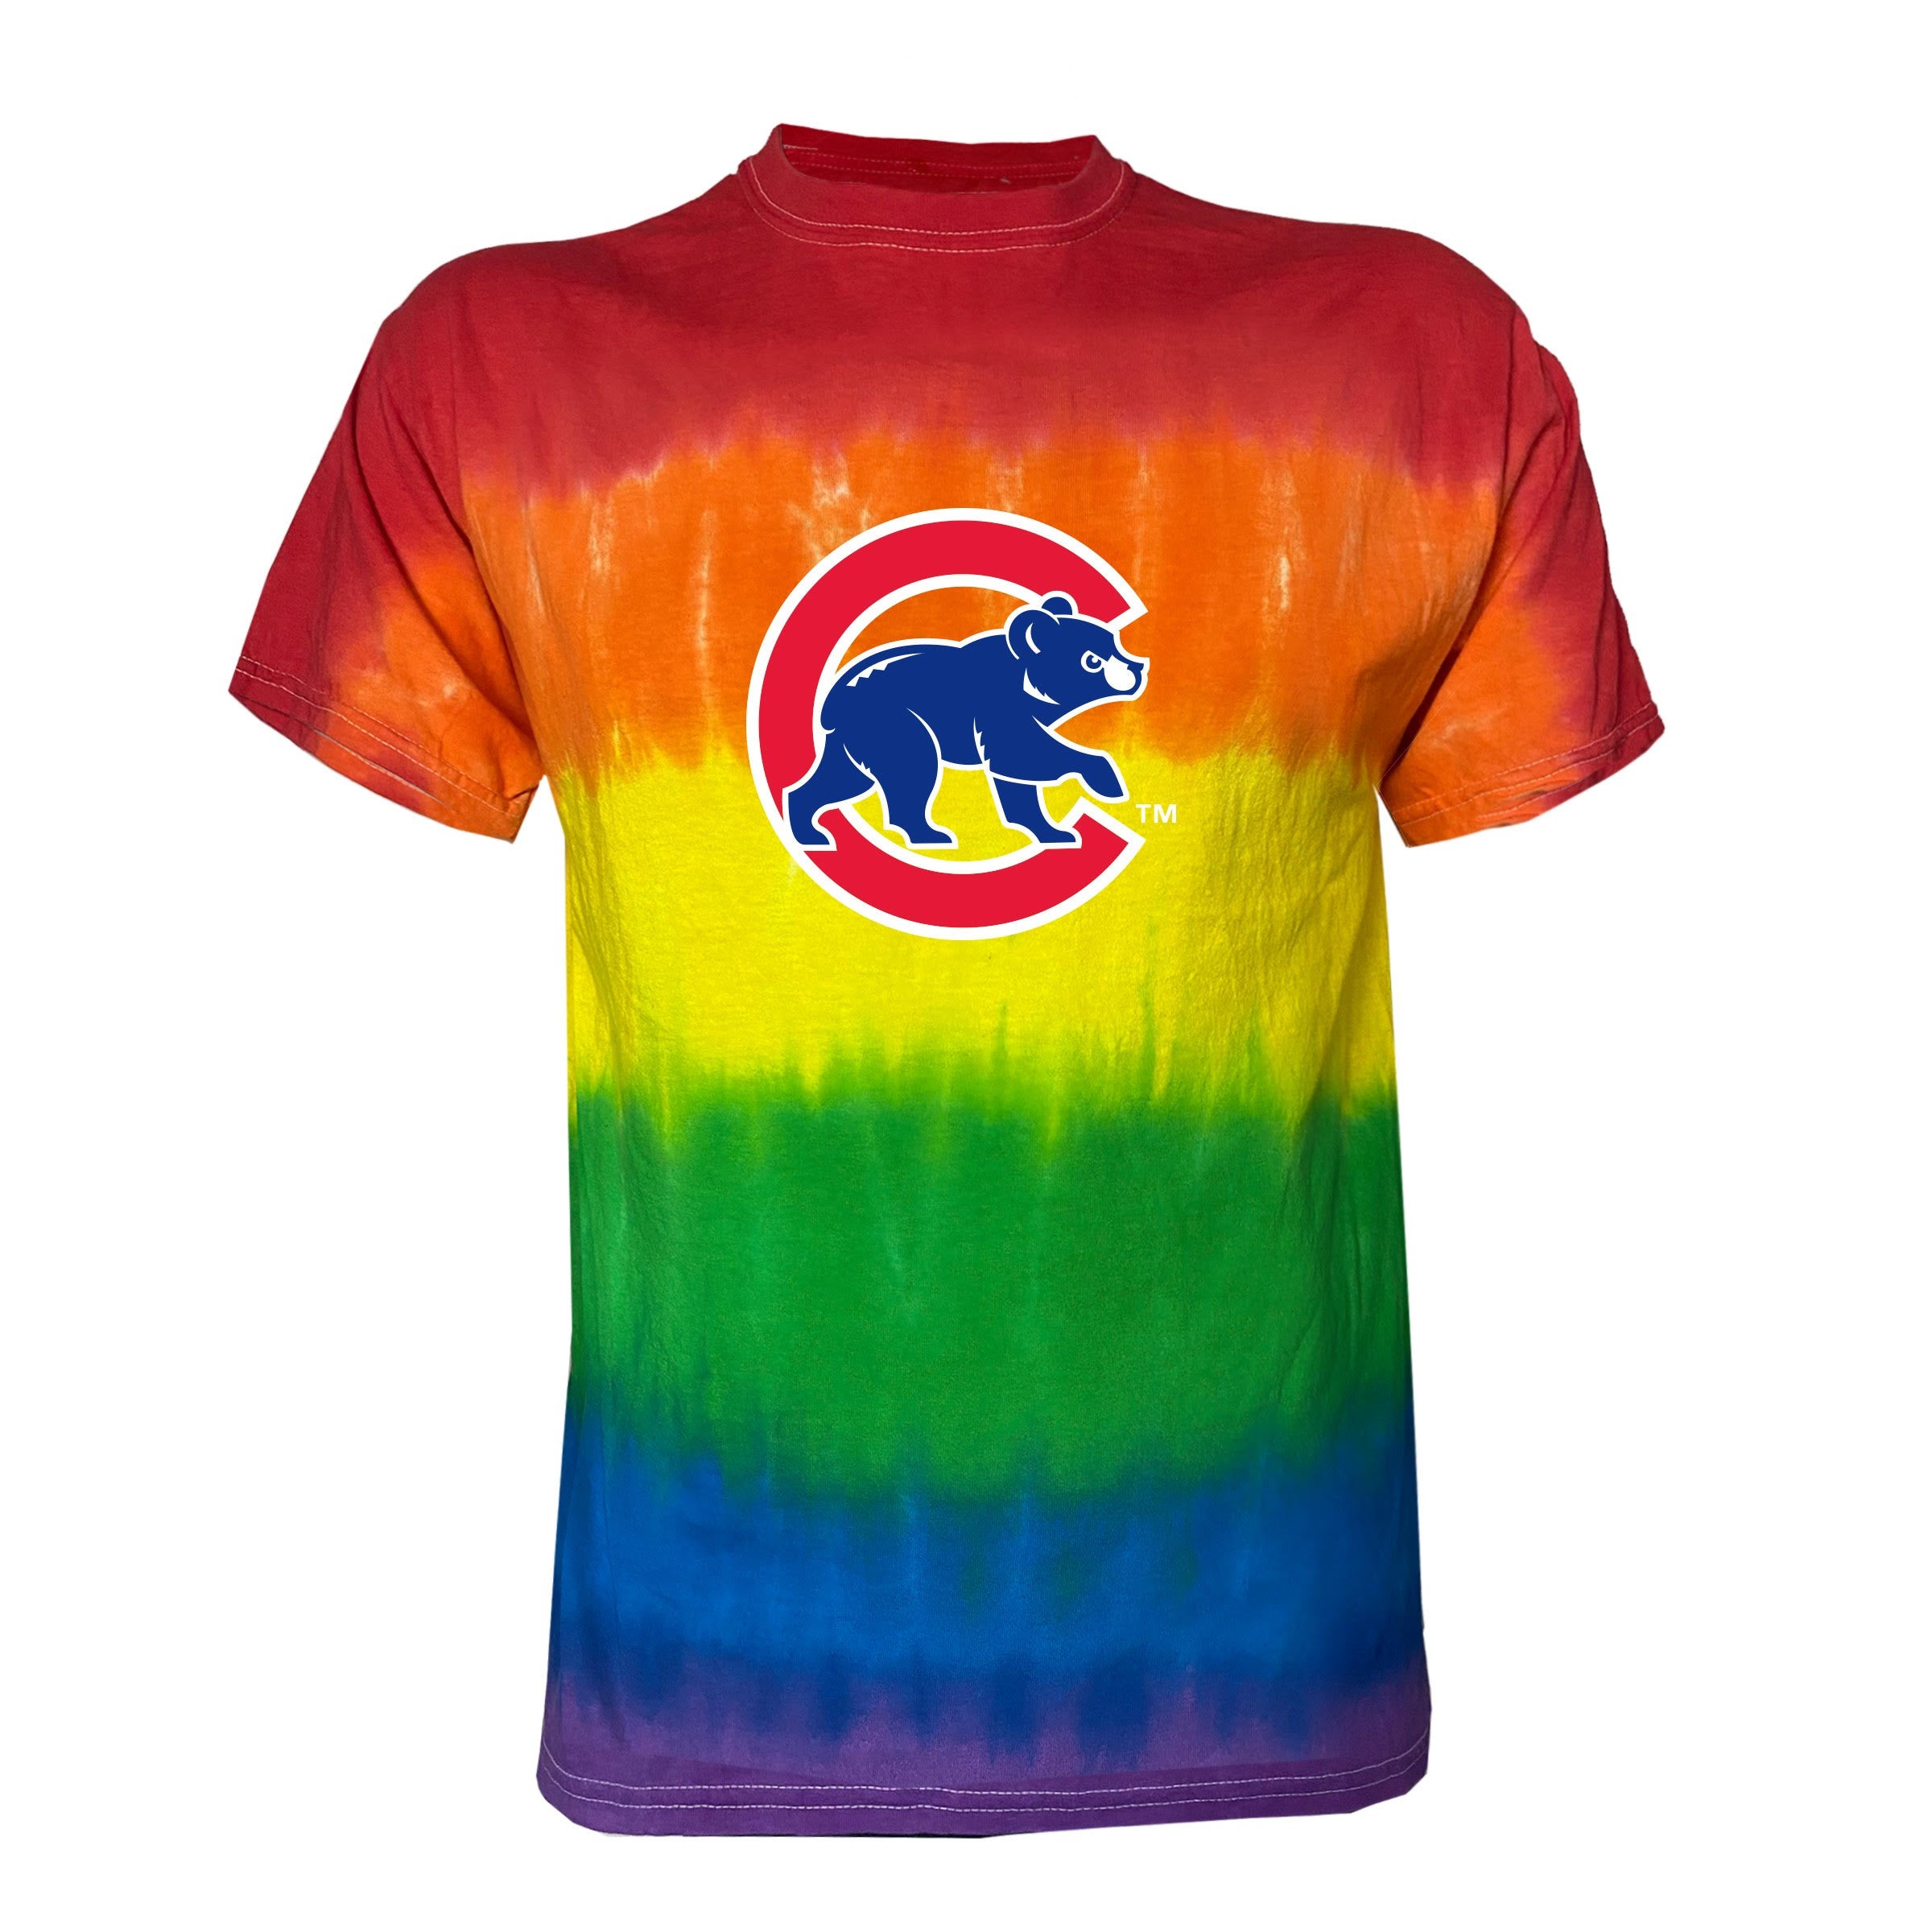 Chicago Cubs Steal Your Base Tie-Dye T-Shirt